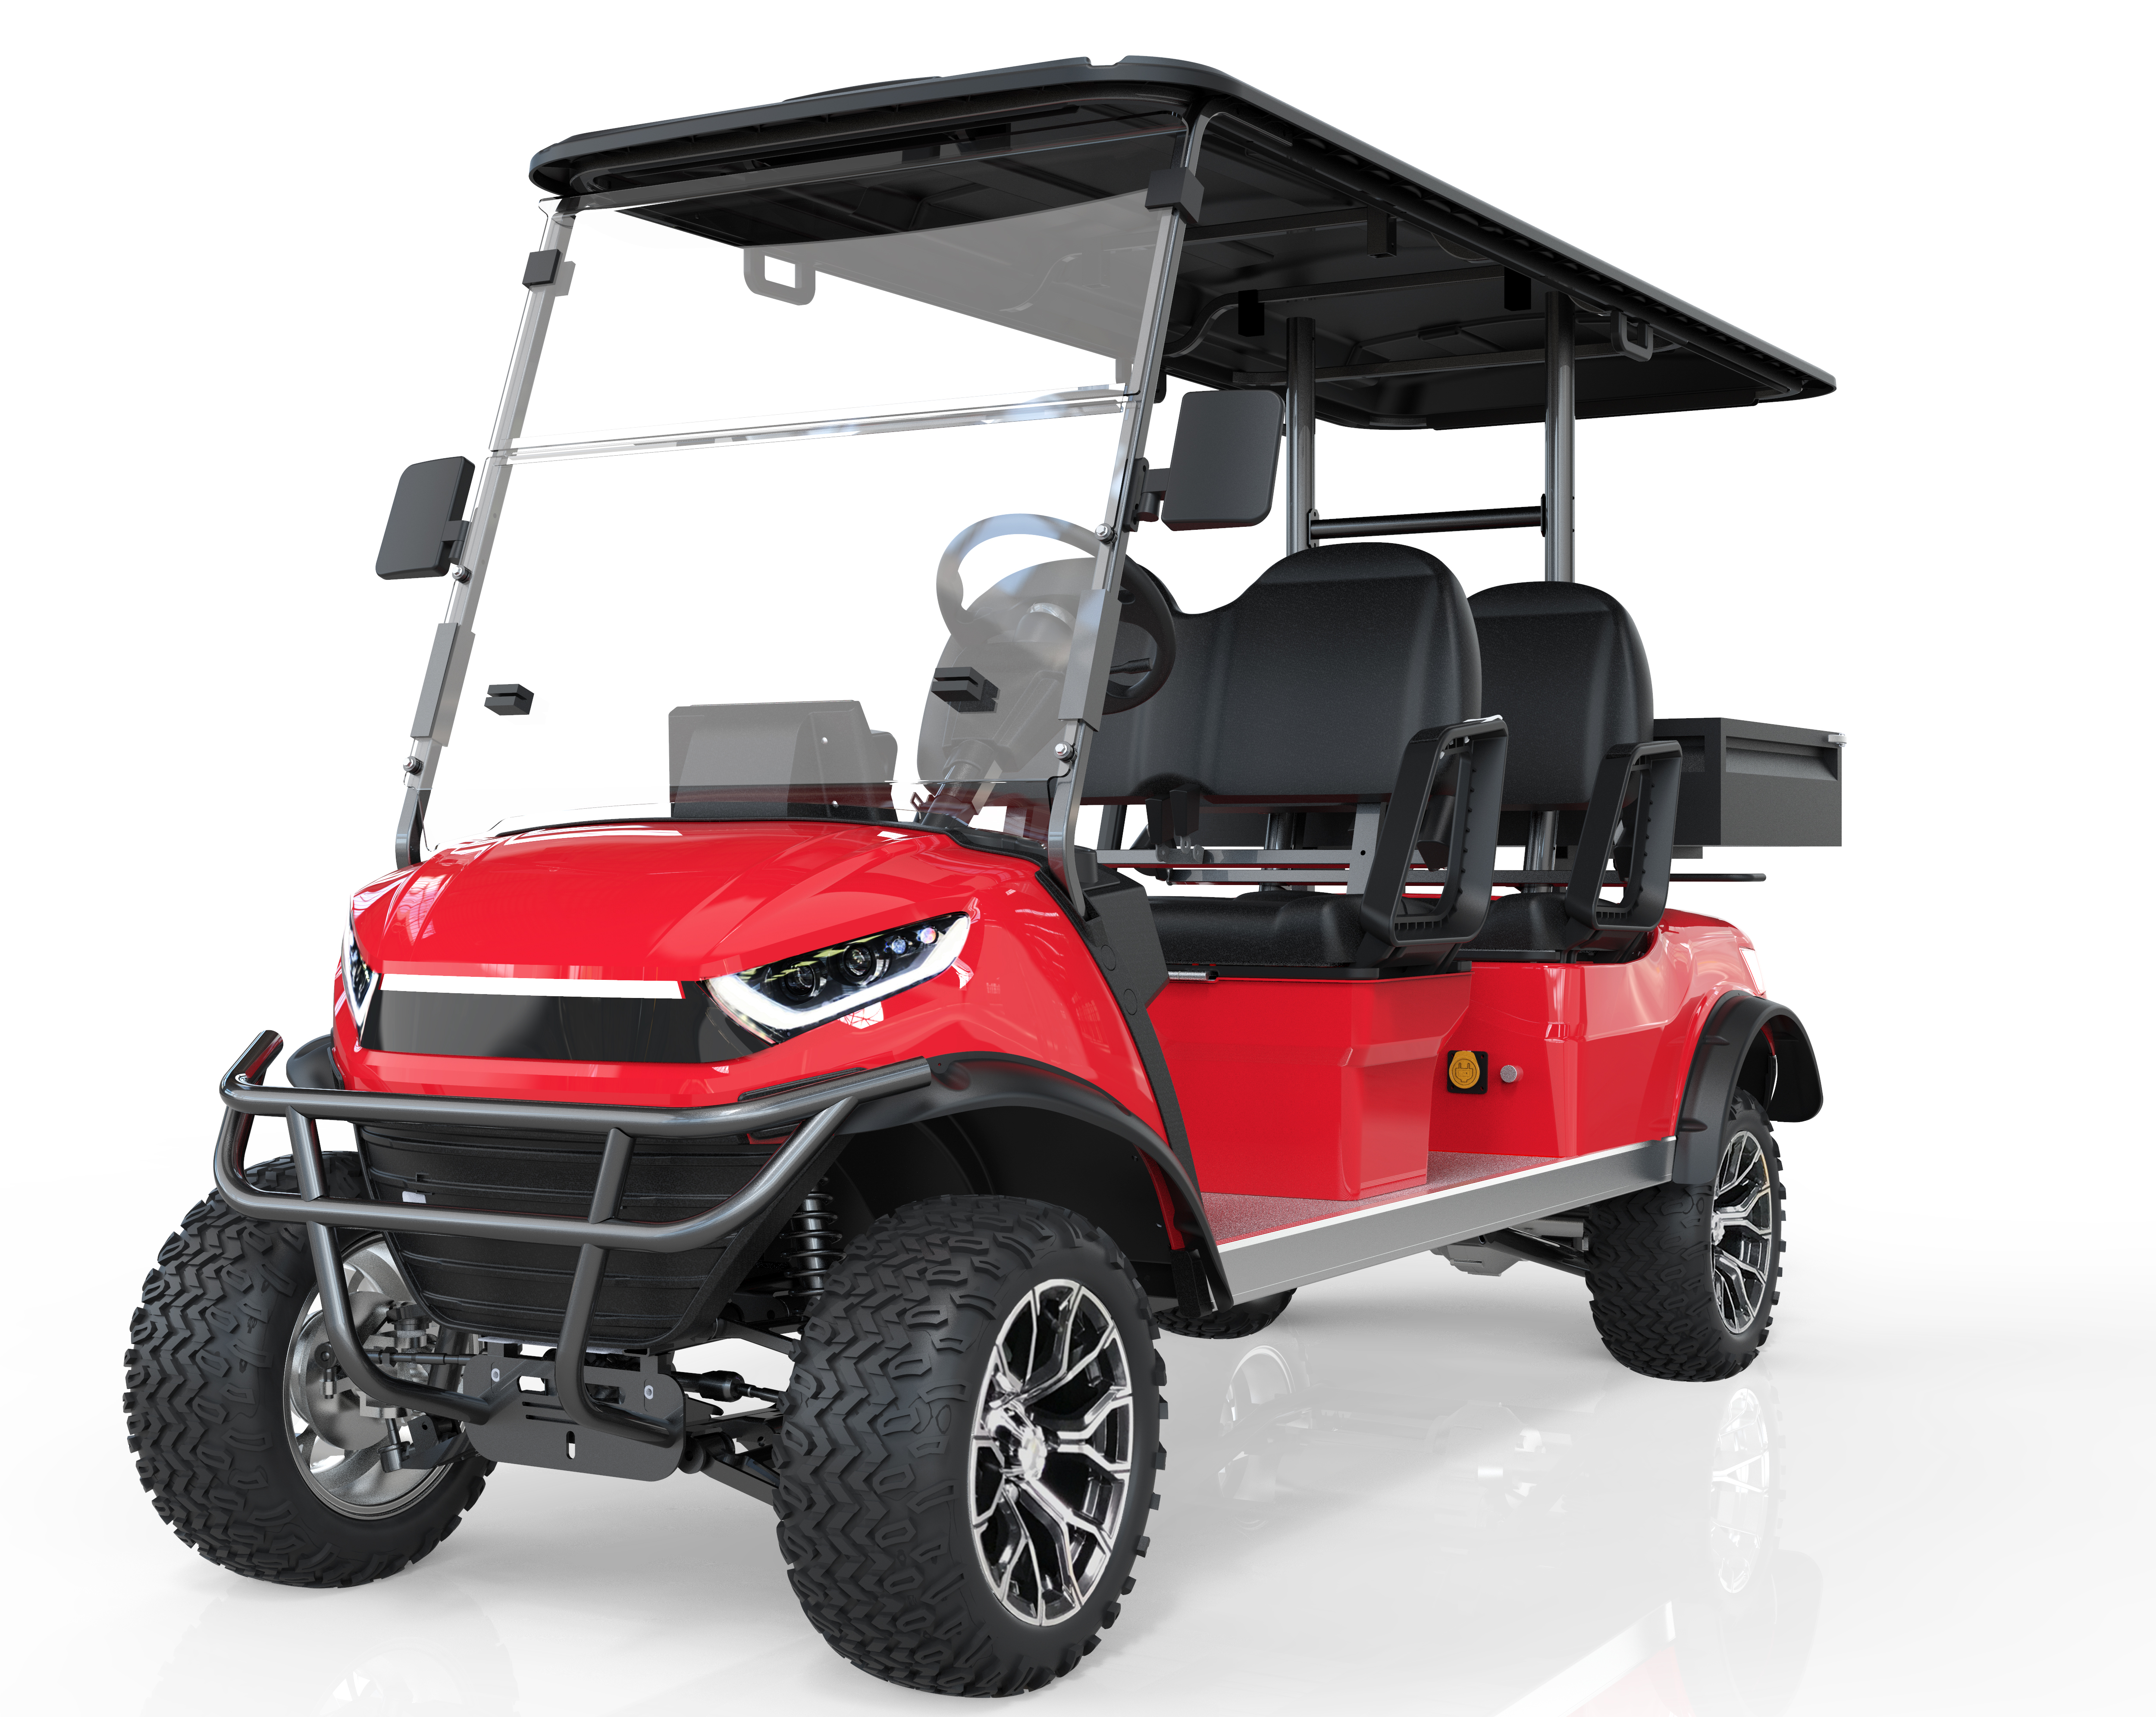 Factory Price Lifted Golf Cart 4 seater Transport Community Fashion Electrical Vehicle